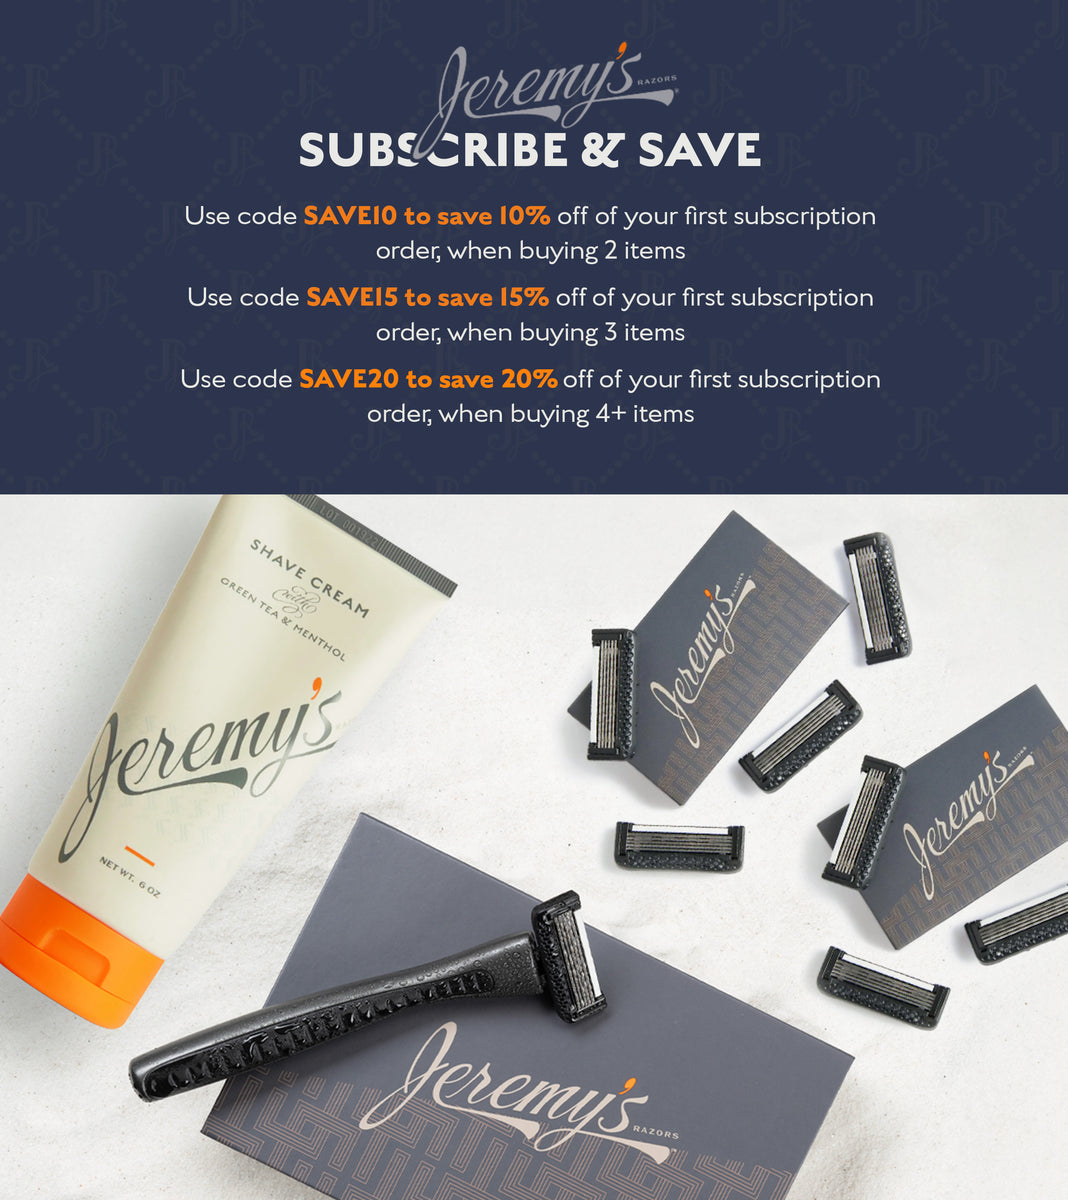 Jeremy's Razors Subscribe & Save. Use code Save10 to save 10% off of your first subscription order, when buying 2 items. Use code Save15 to save 15% off of your first subscription order, when buying 3 items. Use code Save20 to save 20% off of your first subscription order, when buying 4+ items.